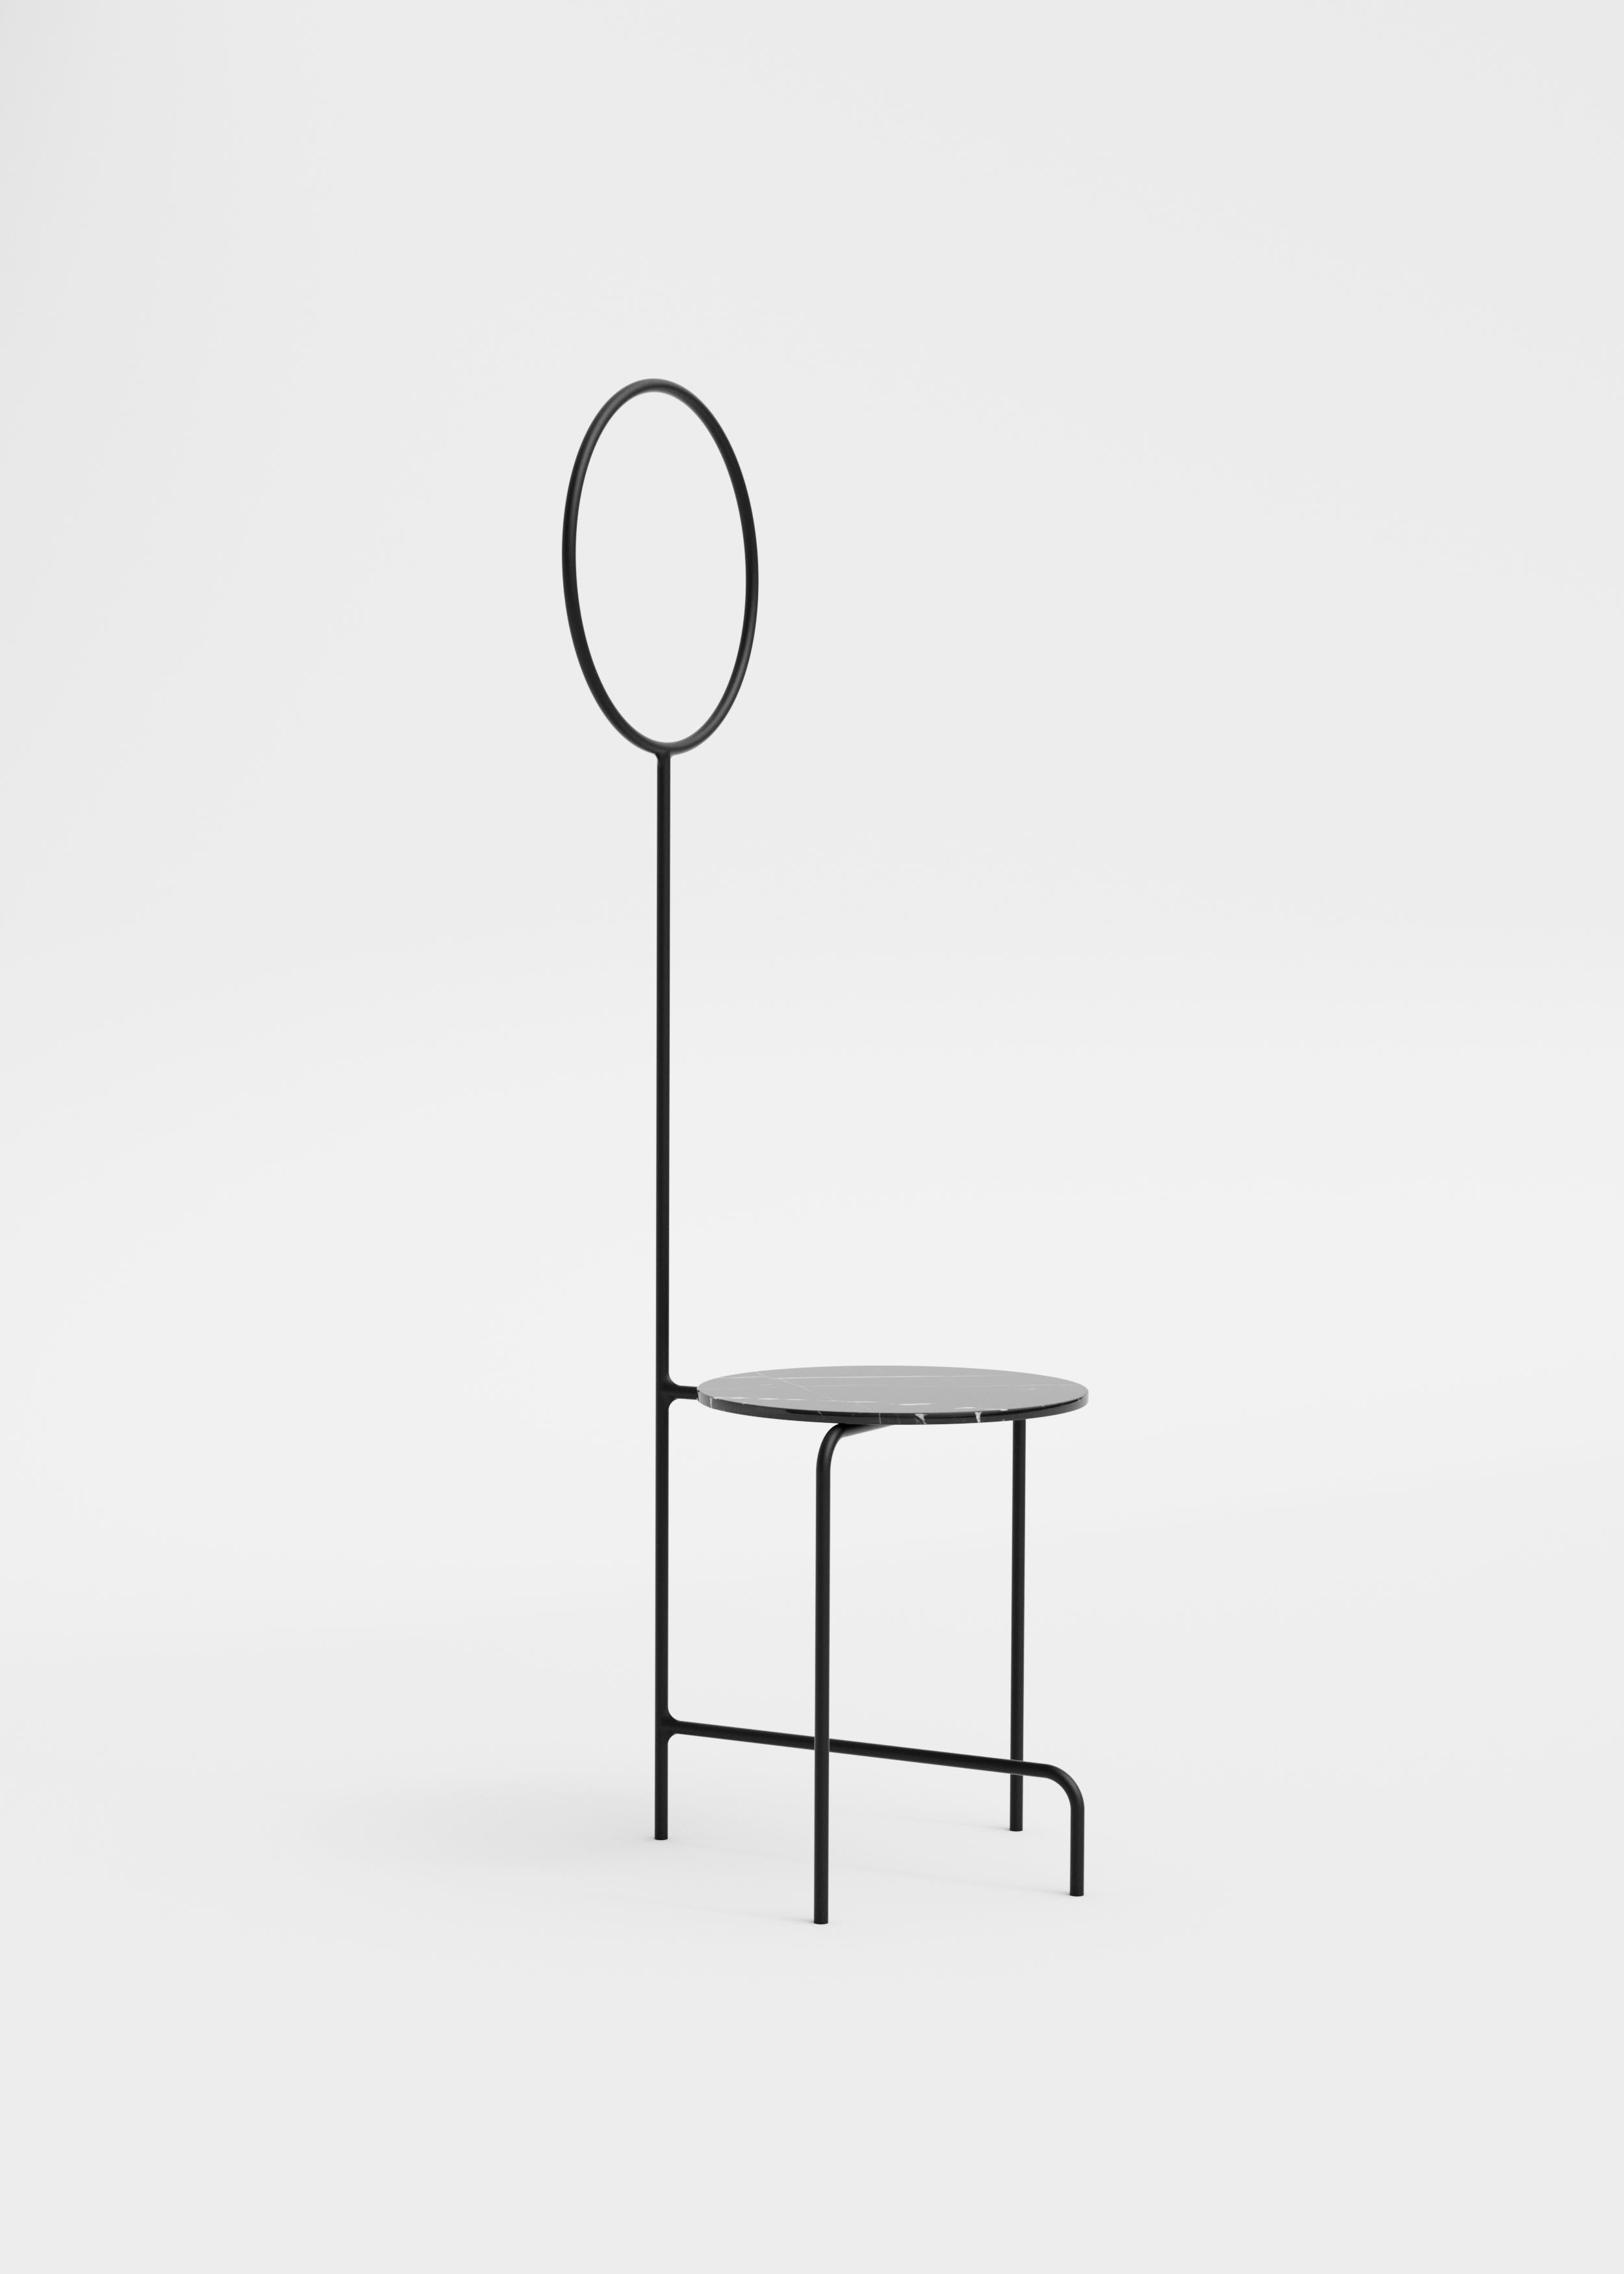 Arauto (2015) figures in interspace and announces the différance. It is a composite species that seeks the gaze of another to define itself. Table or hatstand, pure functionality or a discussion about the possible uses for the object. As an